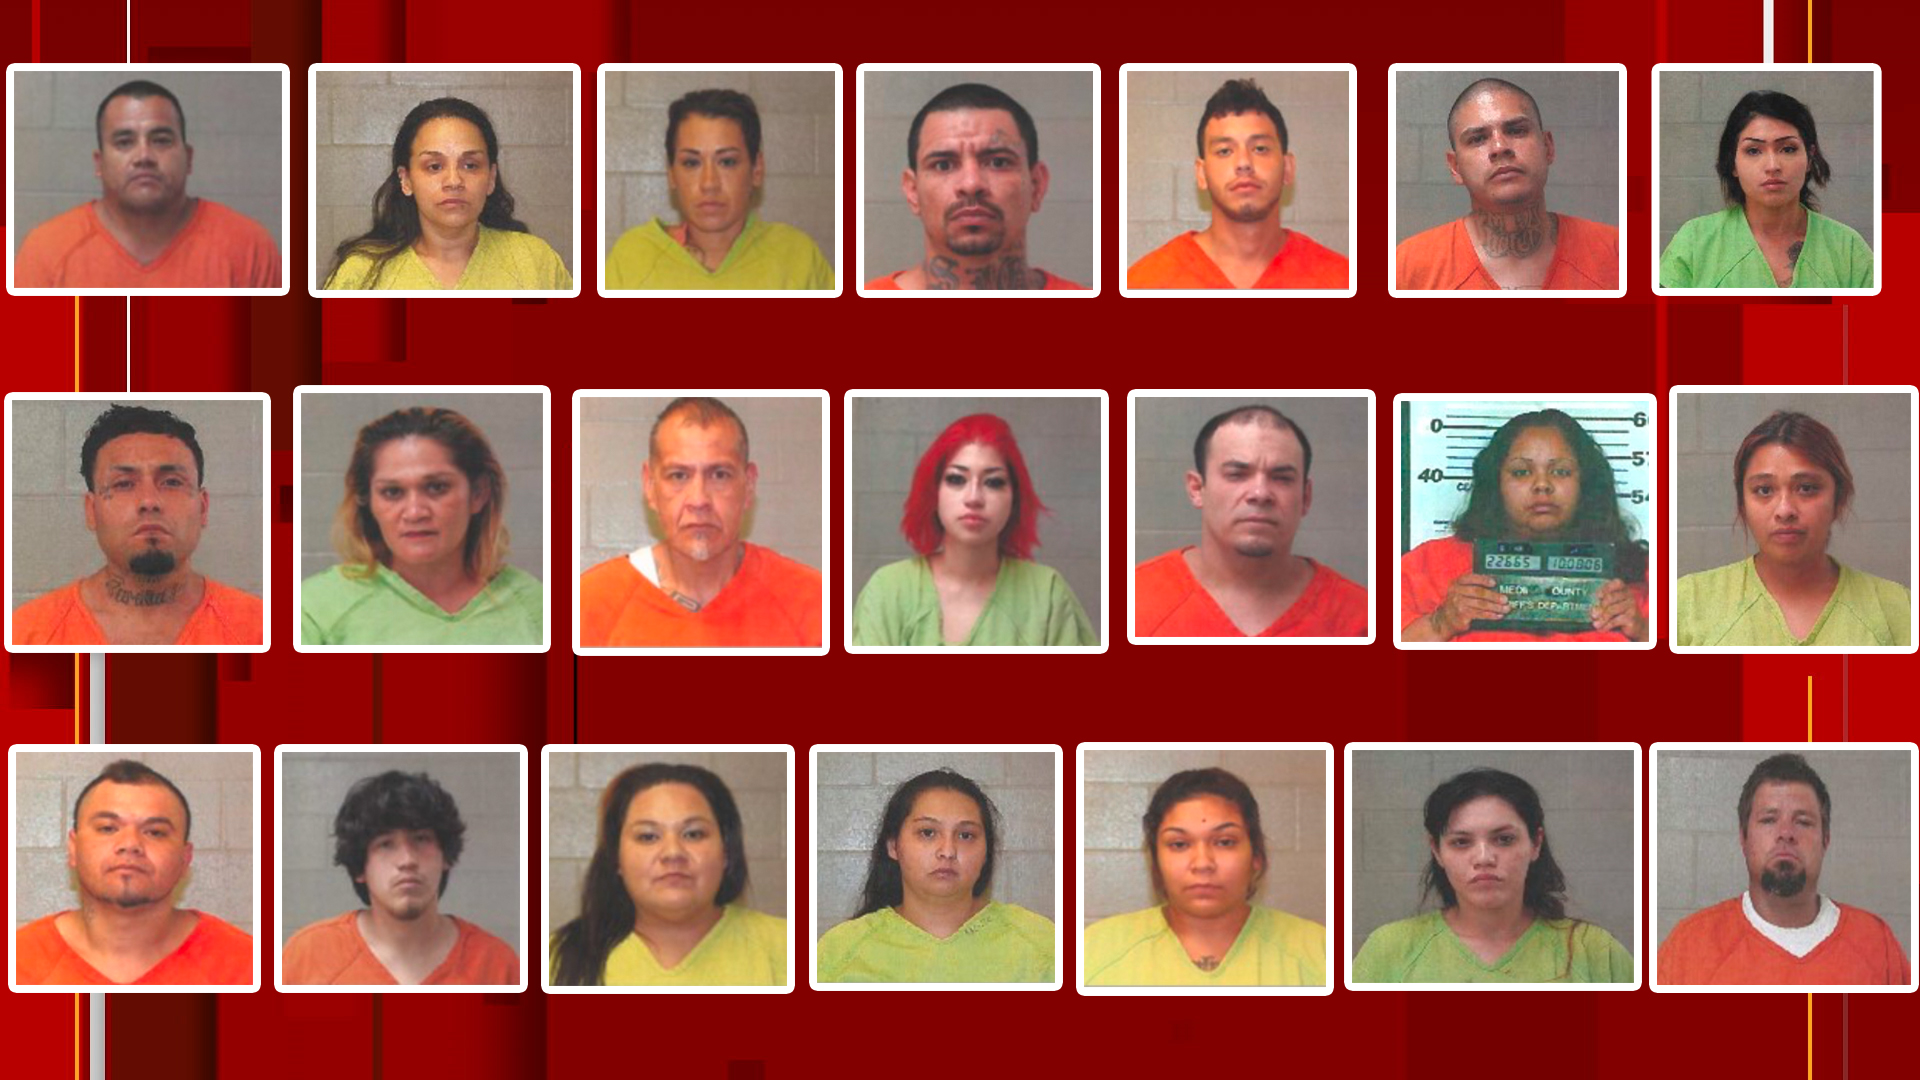 25 people arrested after massive drug bust in San Antonio area, officials  say